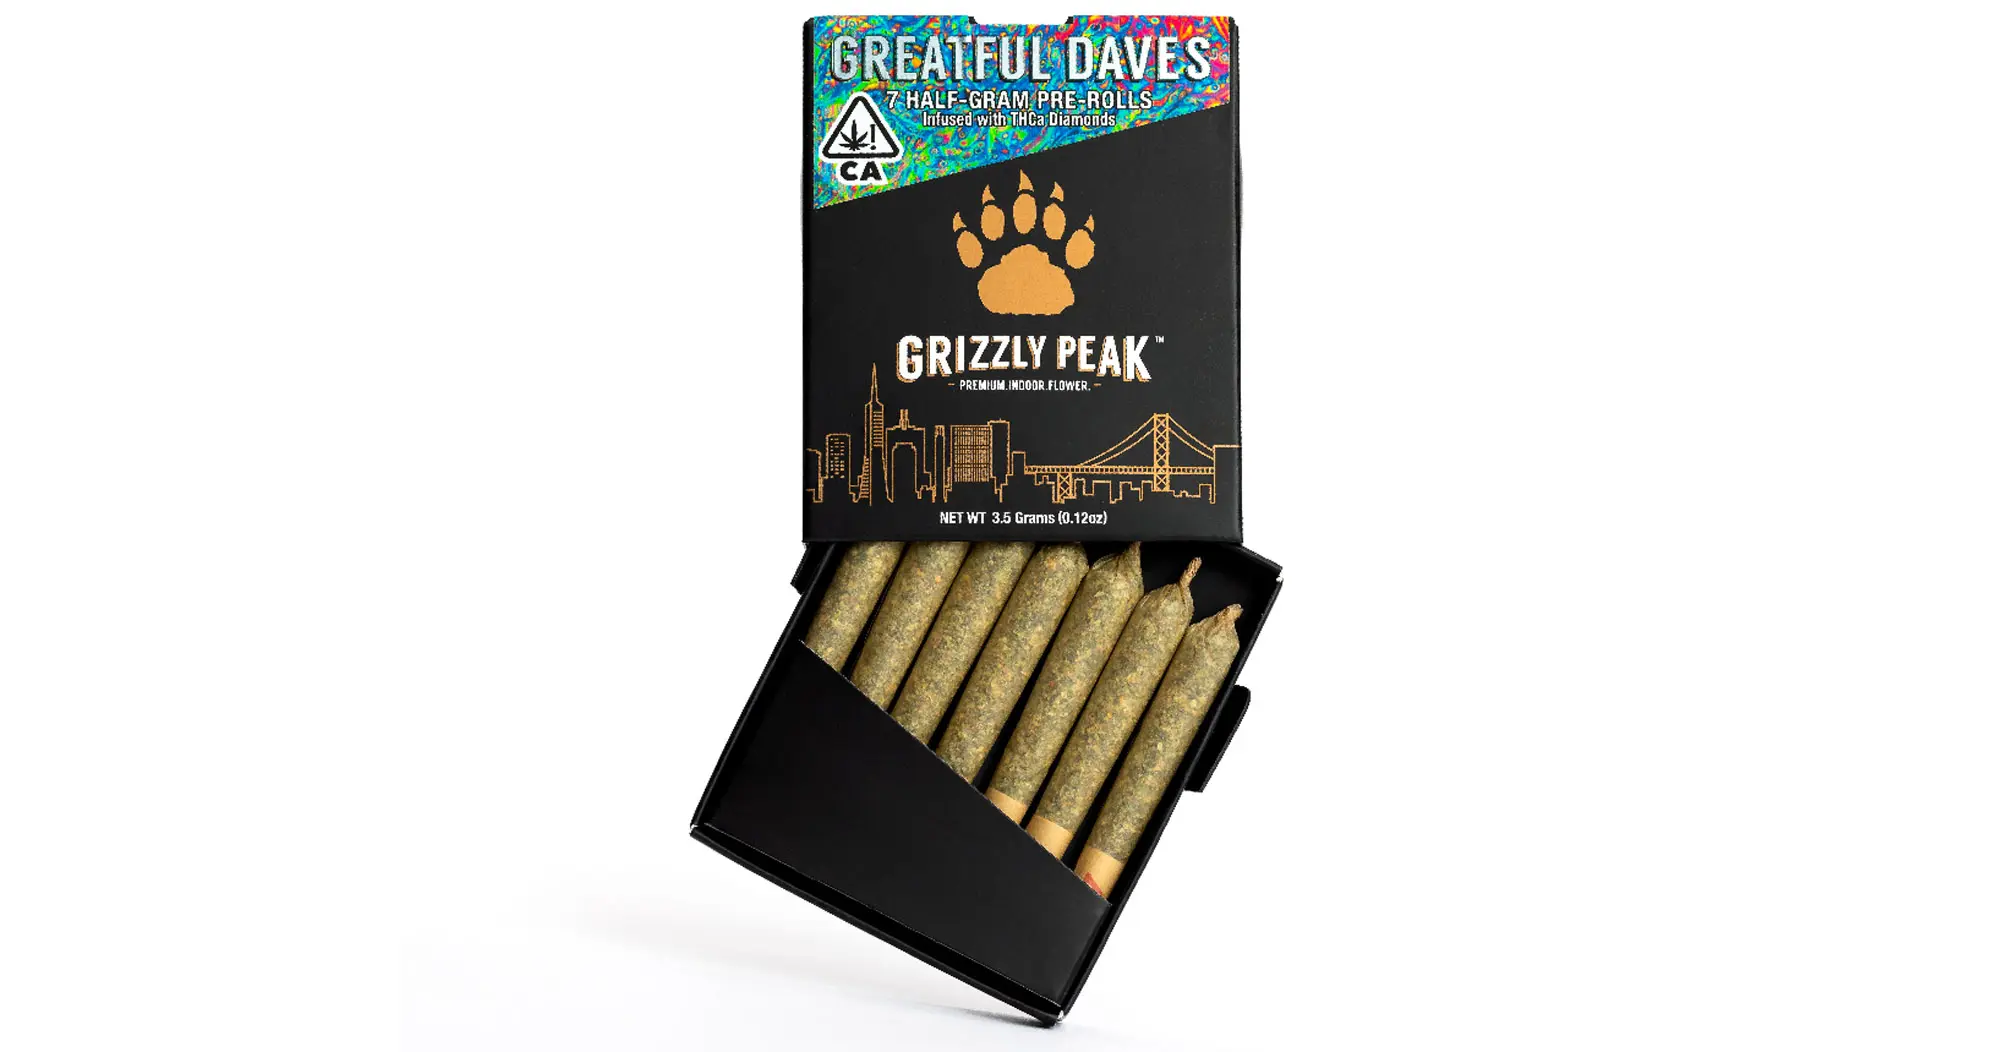 Greatful Dave Infused Pre-Roll Pack